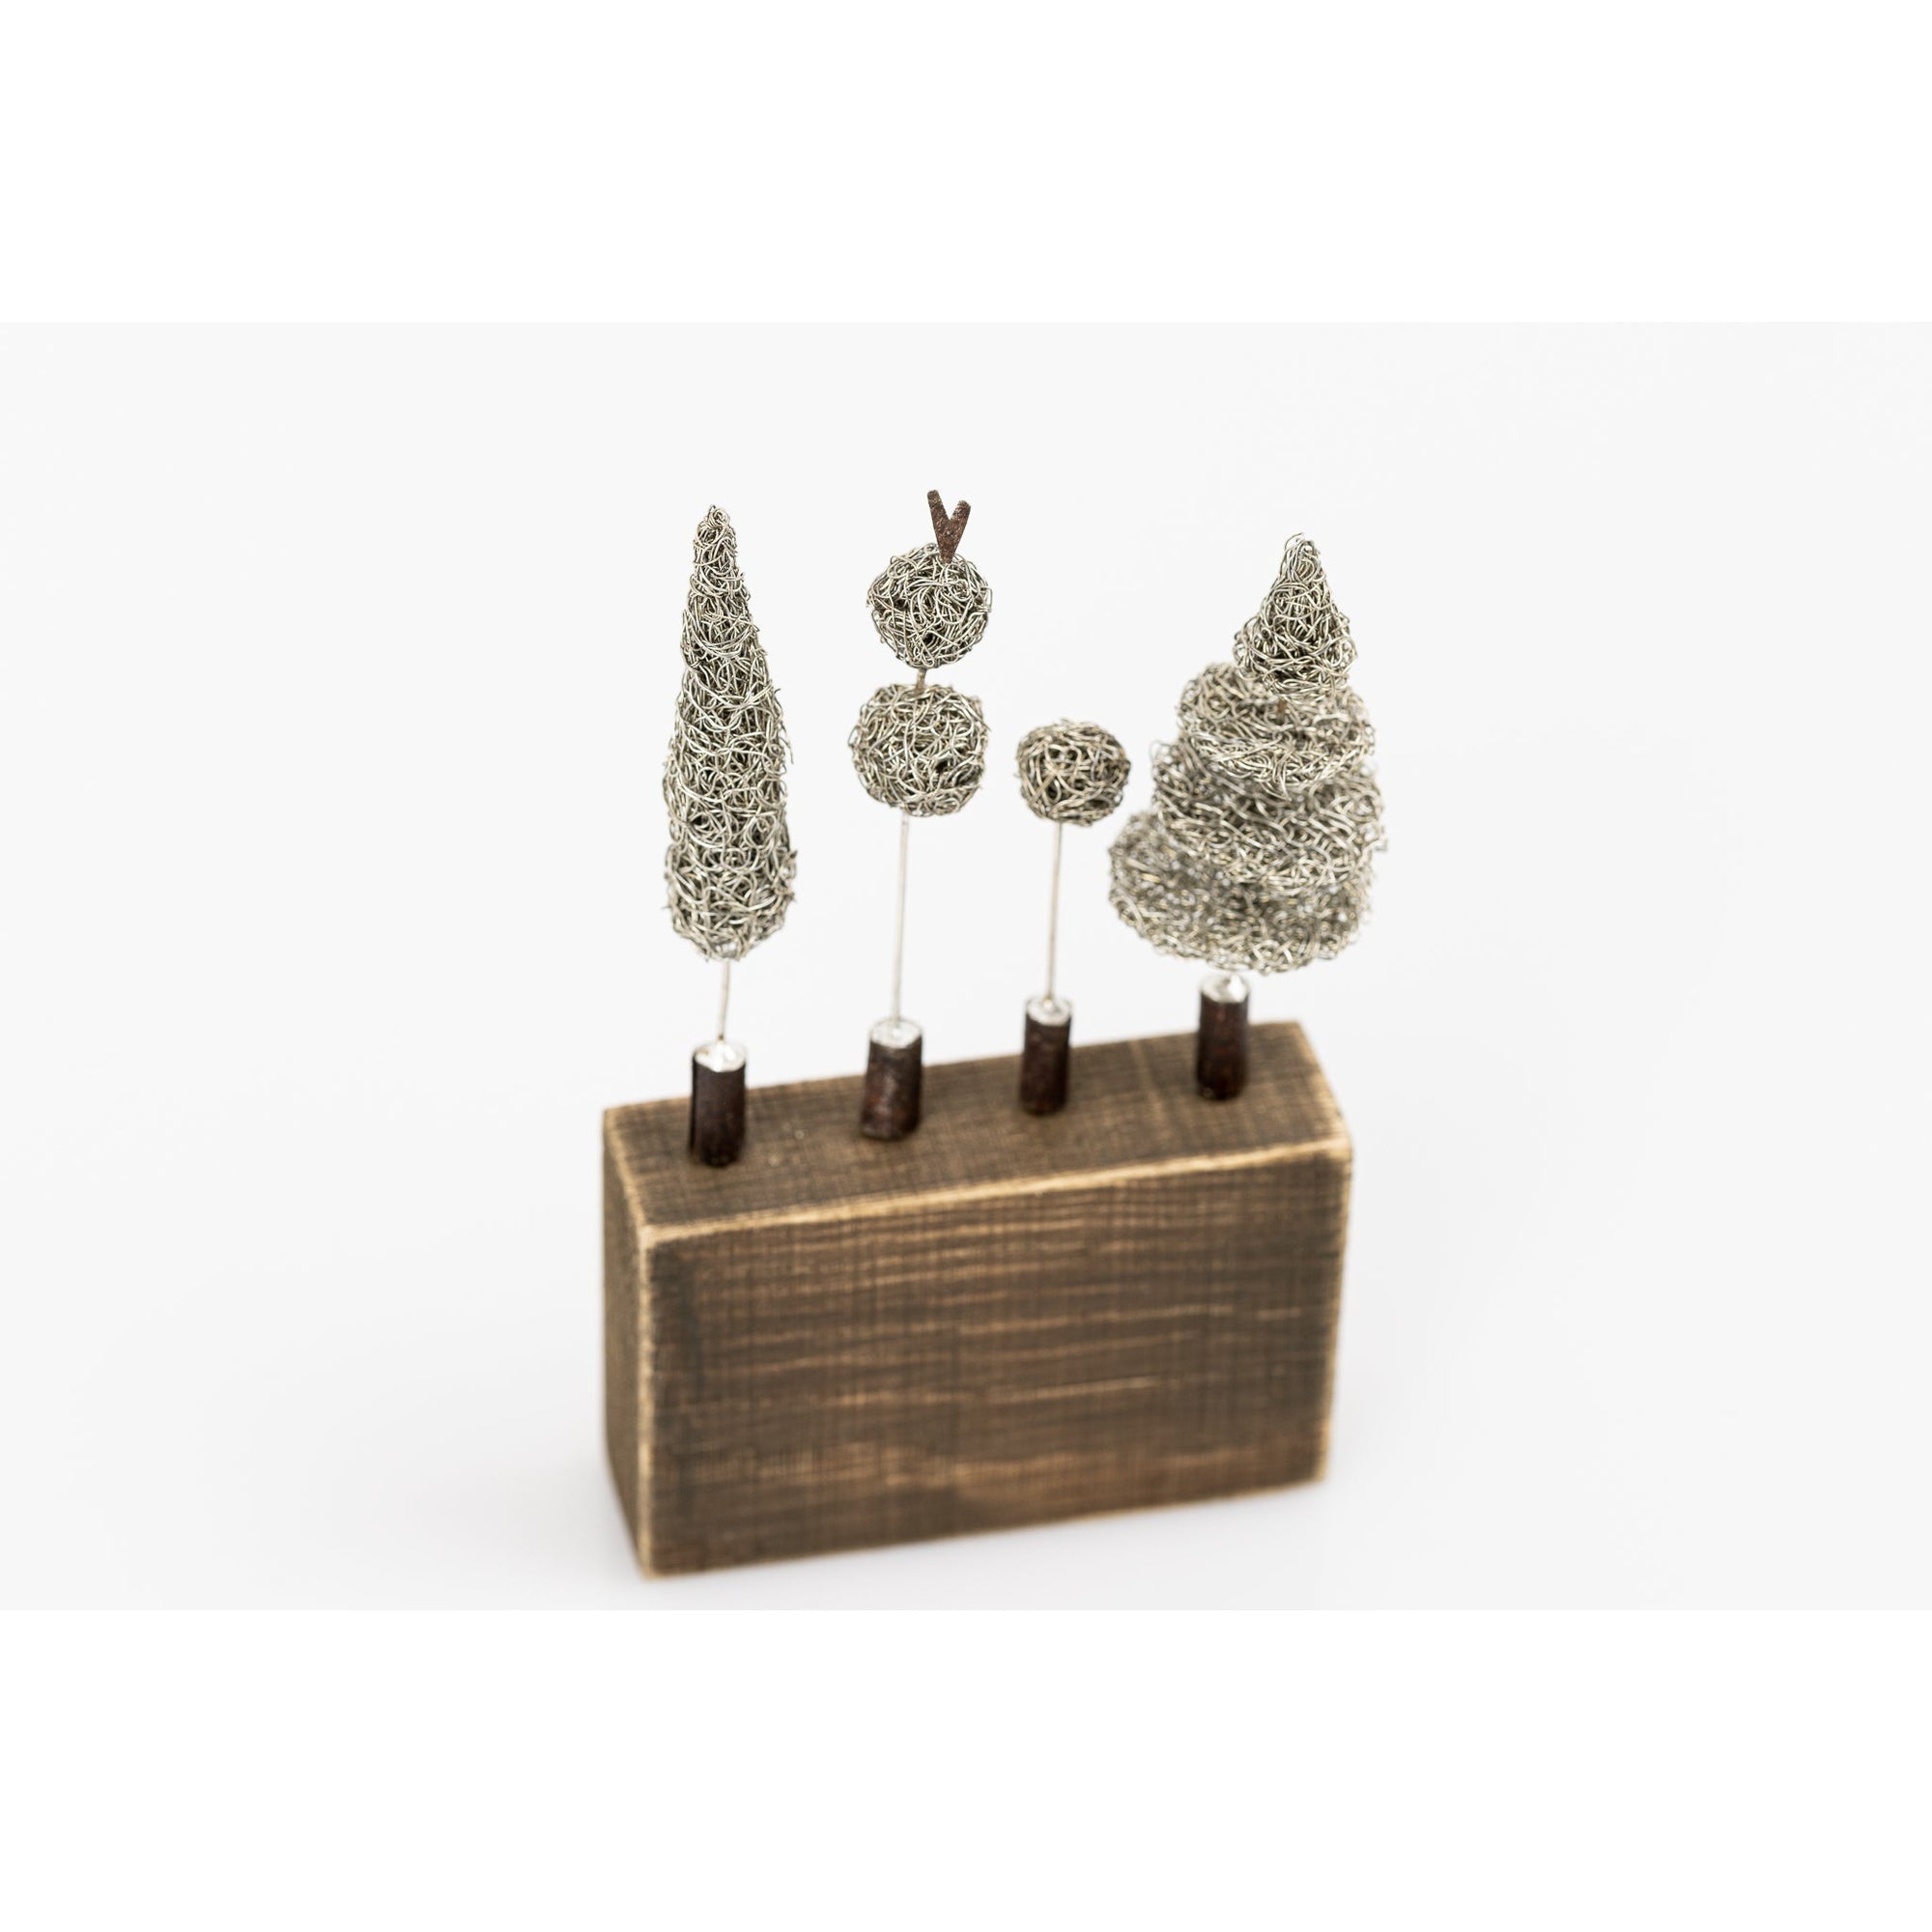 Mini Topiary by Sarah Jane Brown available at Padstow Gallery, Cornwall